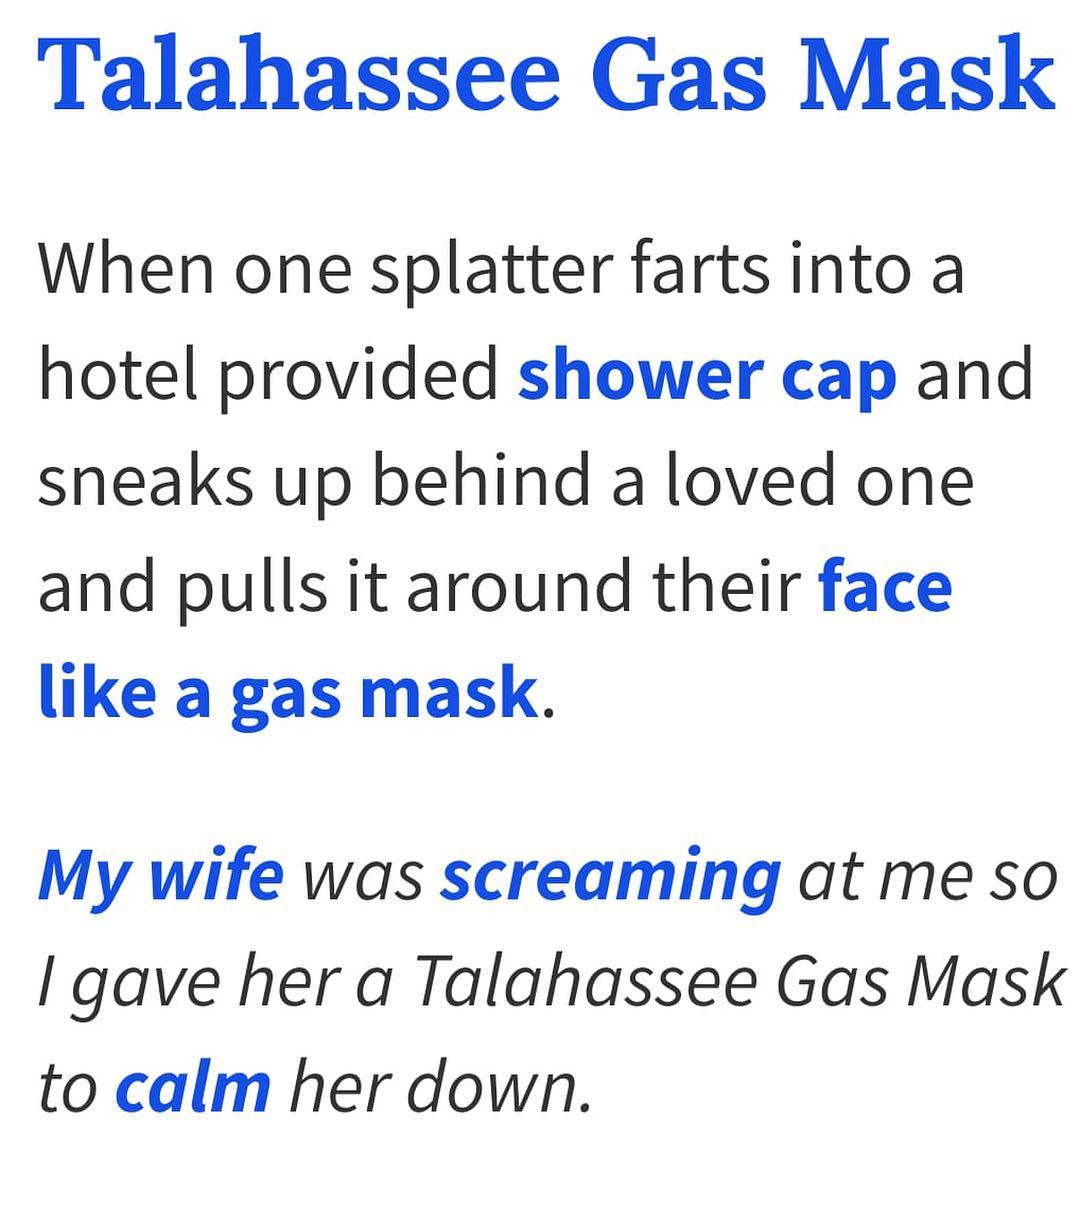 blackberry style 9670 - Talahassee Gas Mask When one splatter farts into a hotel provided shower cap and sneaks up behind a loved one and pulls it around their face a gas mask. My wife was screaming at me so Igave her a Talahassee Gas Mask to calm her dow